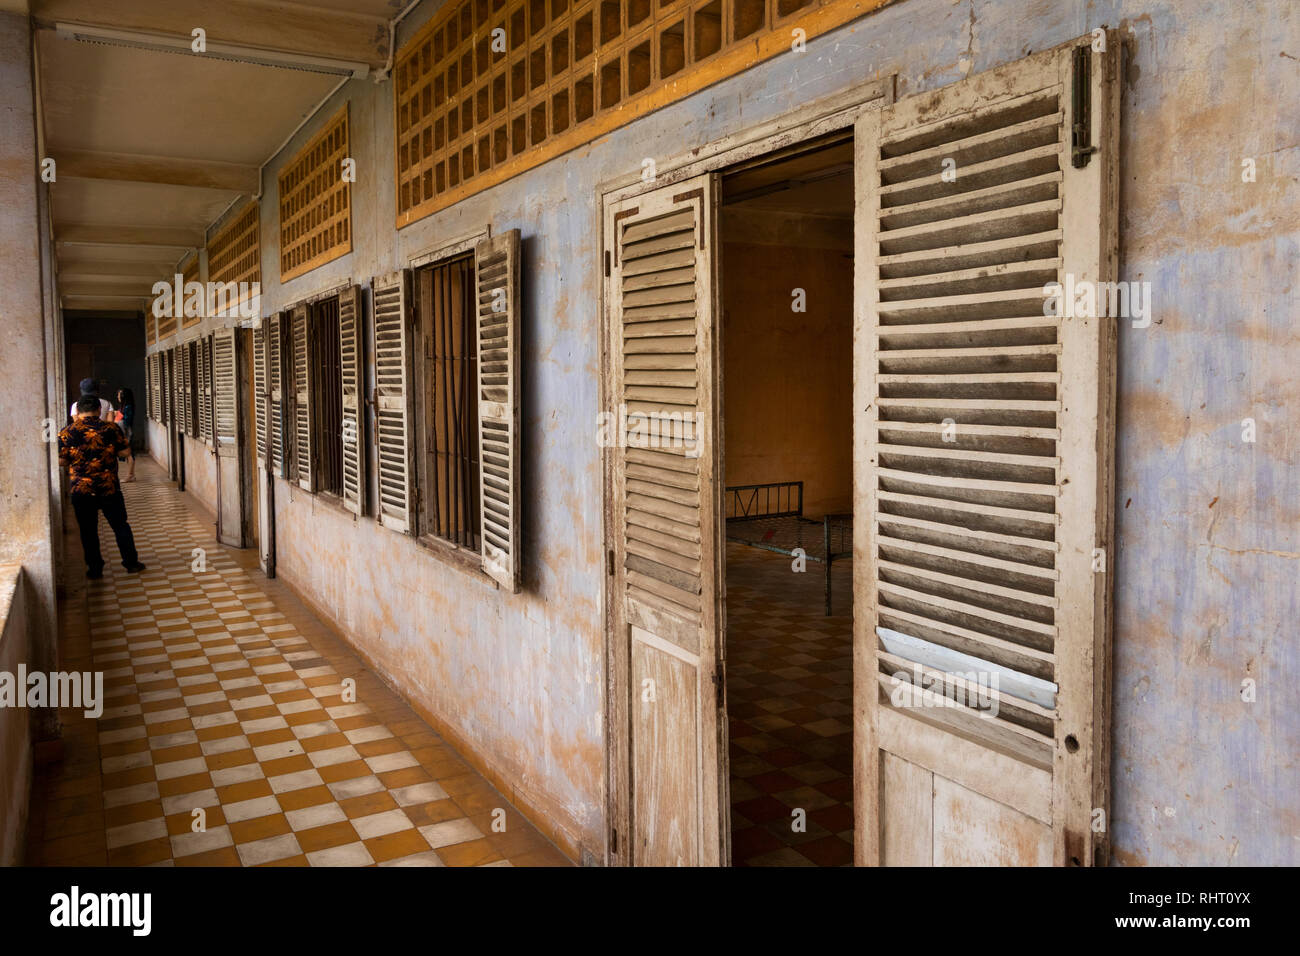 Cambodia, Phnom Penh, Street 113, Tuol Sleng genocide museum, torture cells in classrooms of former Tuol Svey Prey High School used by Khmer Rouge Stock Photo